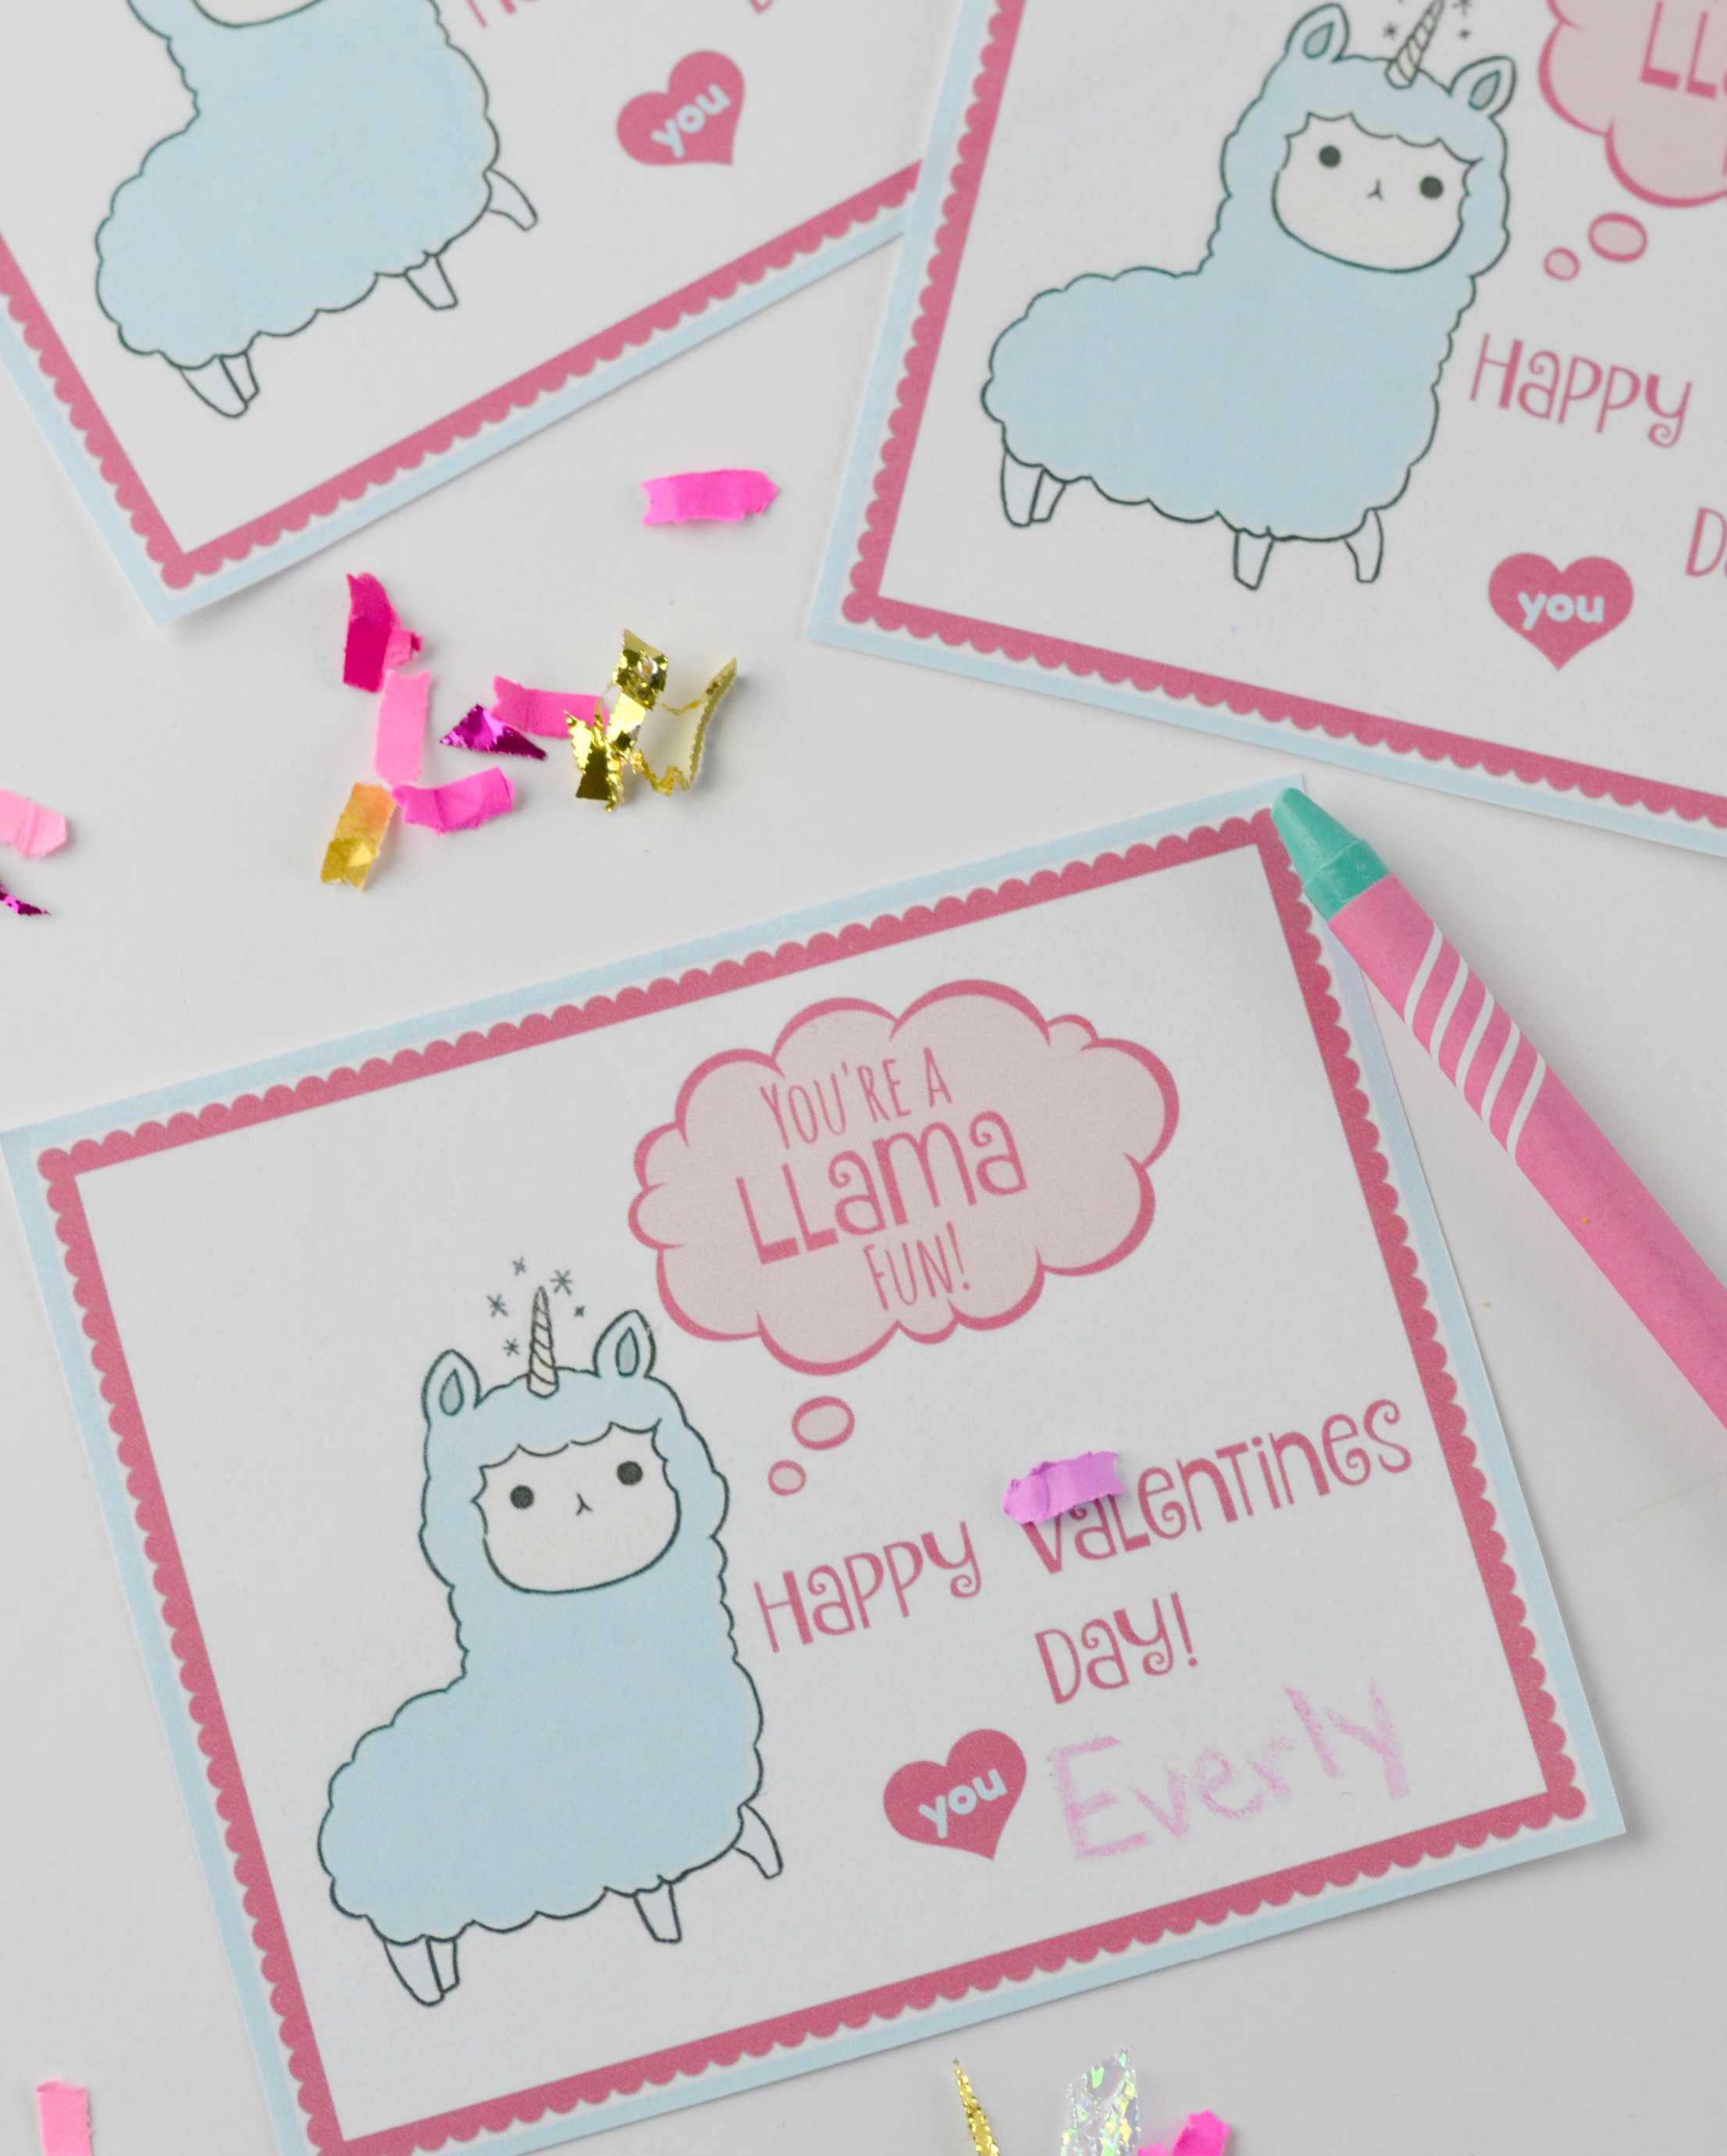 3-free-printable-valentines-day-cards-perfect-for-kids-to-share-at